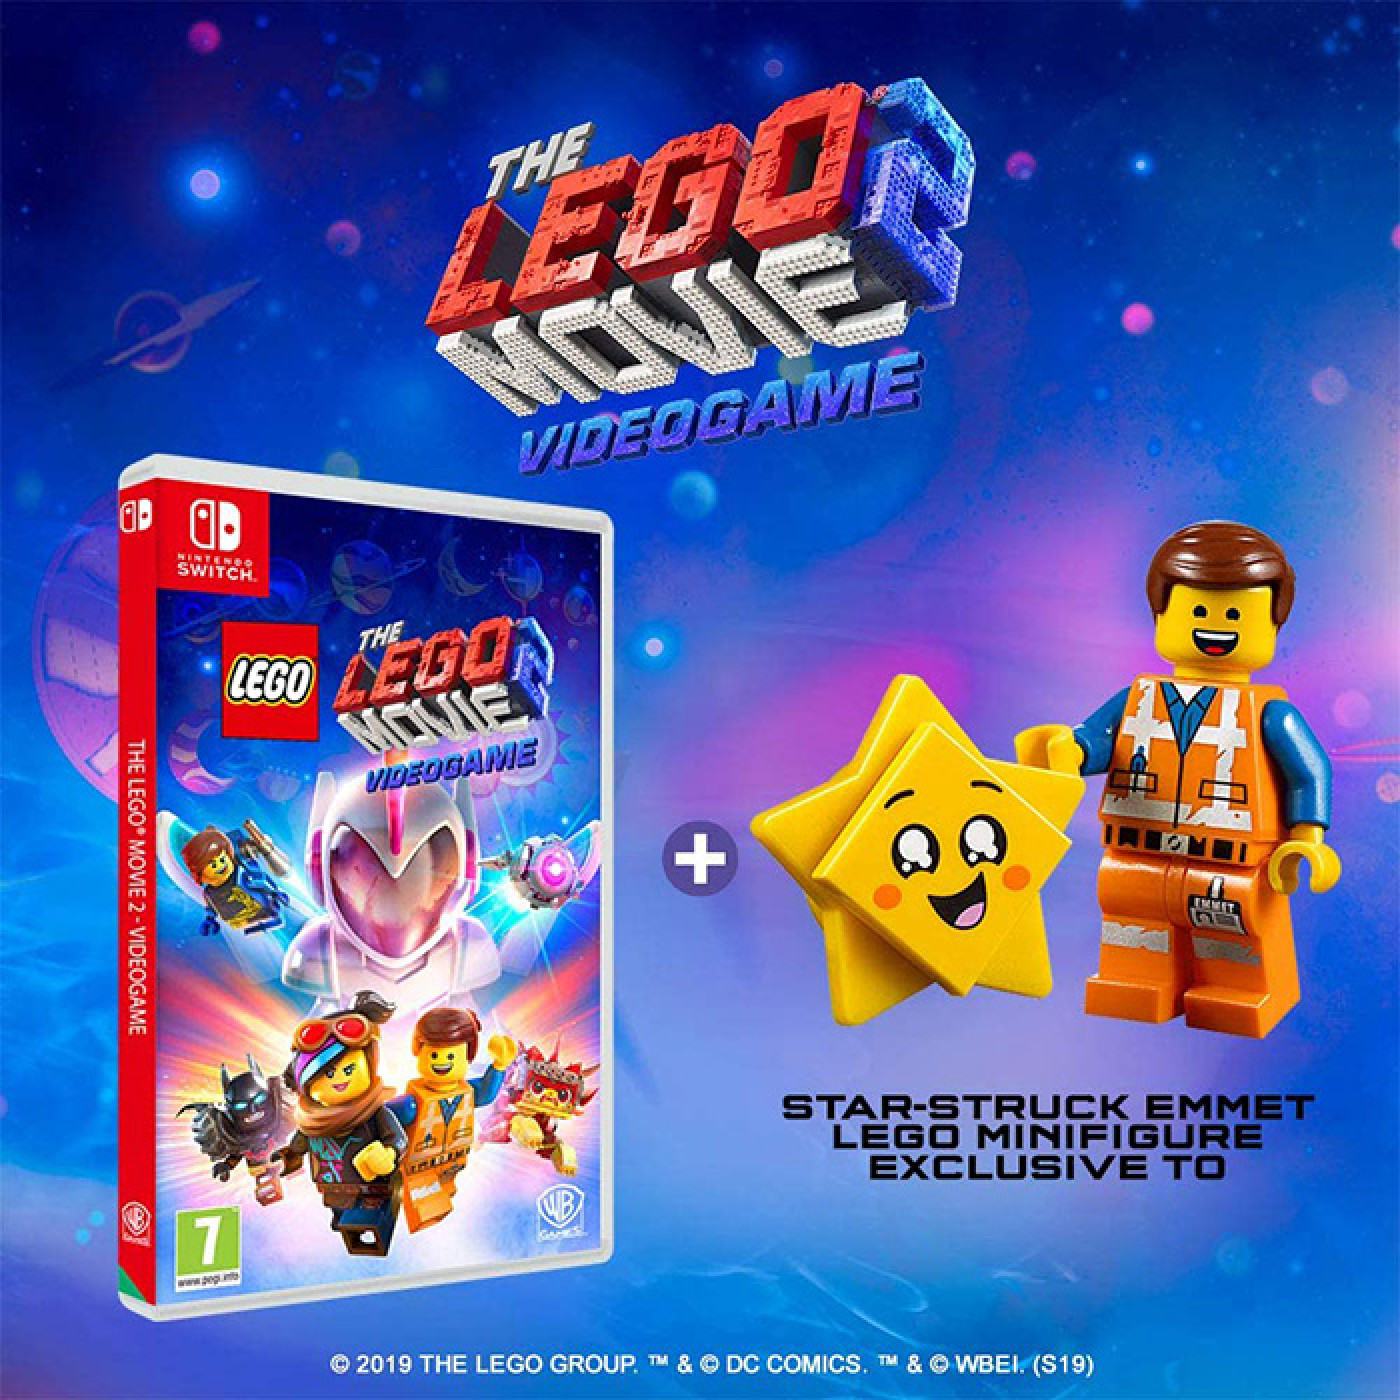 the-lego-movie-2-videogame-minifigure-edition-game-nintendo-switch